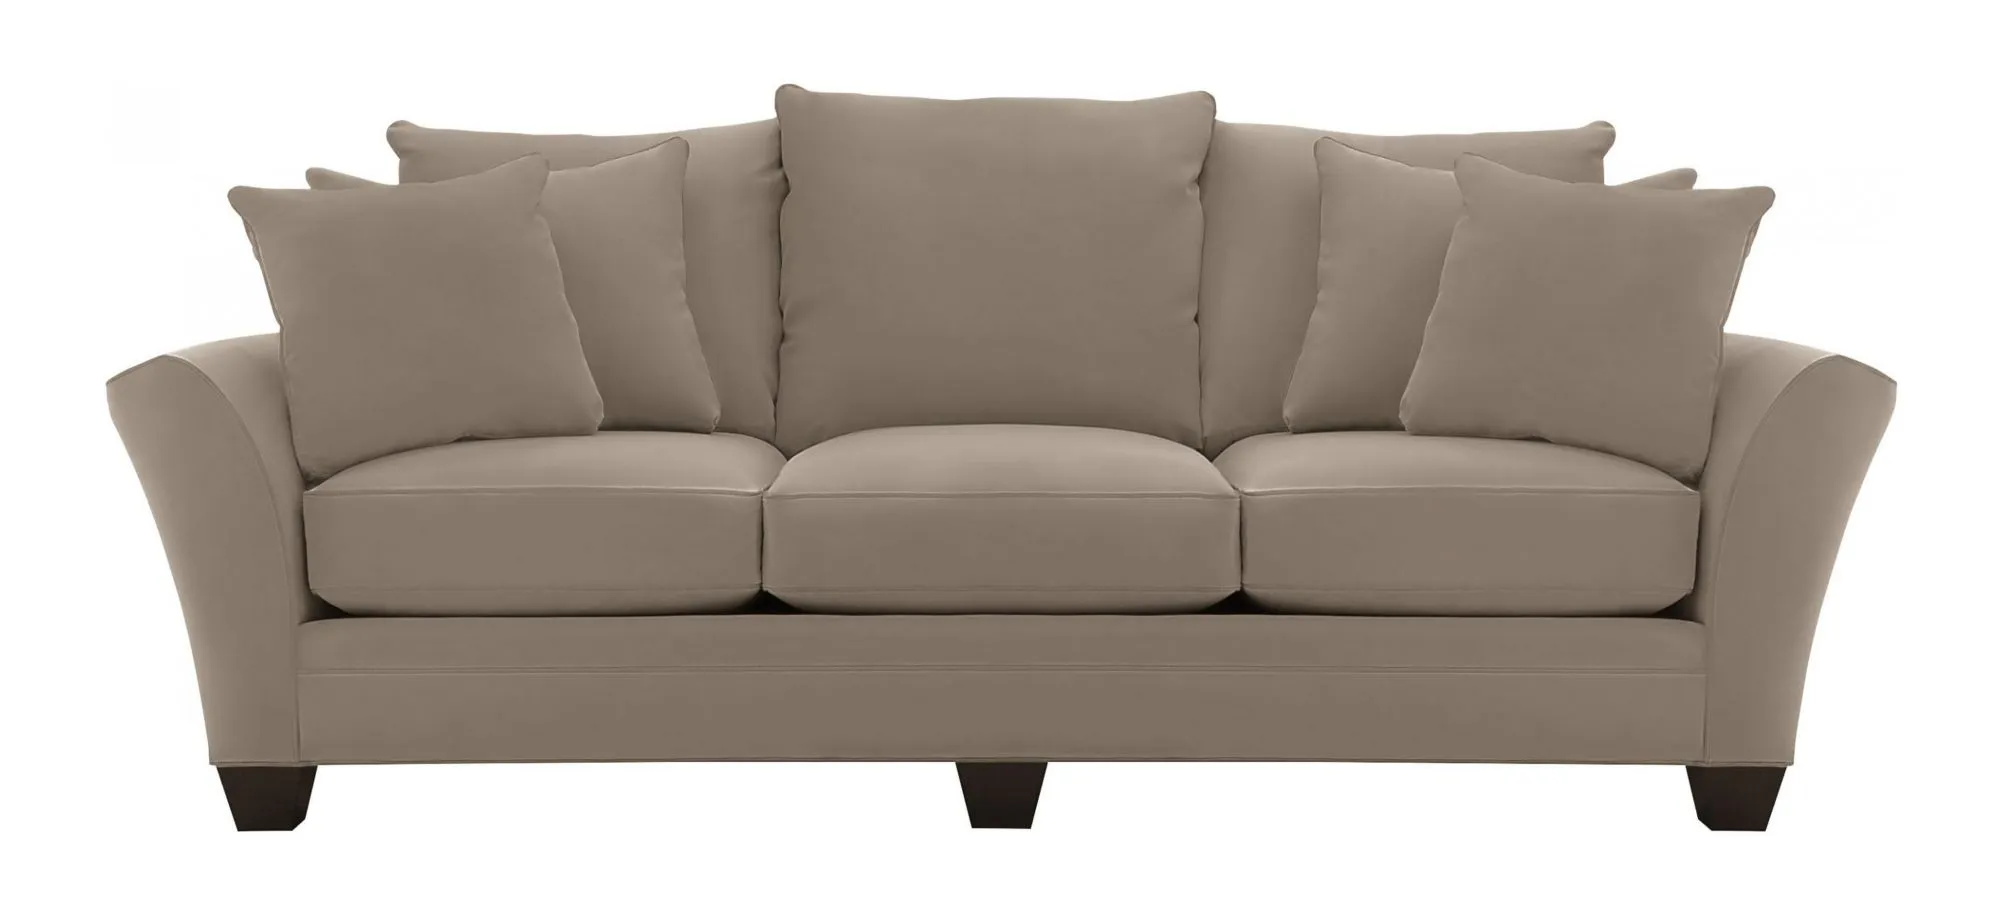 Briarwood Sofa in Suede So Soft Mineral by H.M. Richards